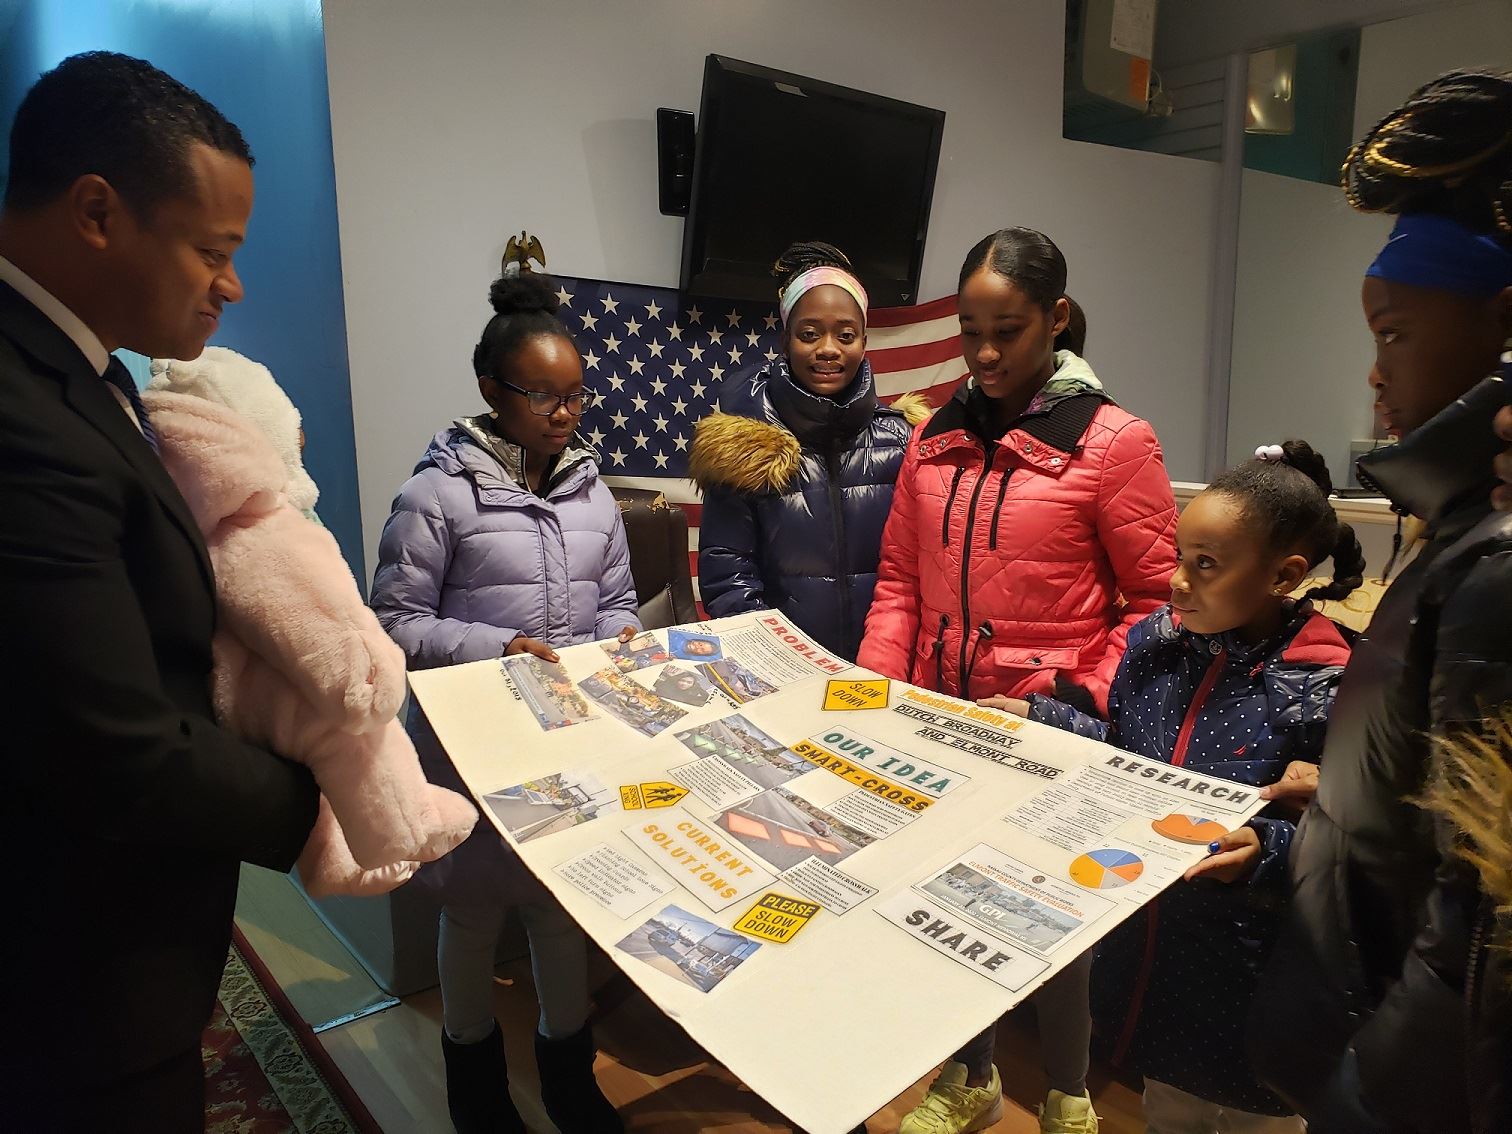 Legislator Solages discusses a Dutch Broadway traffic safety proposal with young people from Elmont during a community meeting earlier this year.